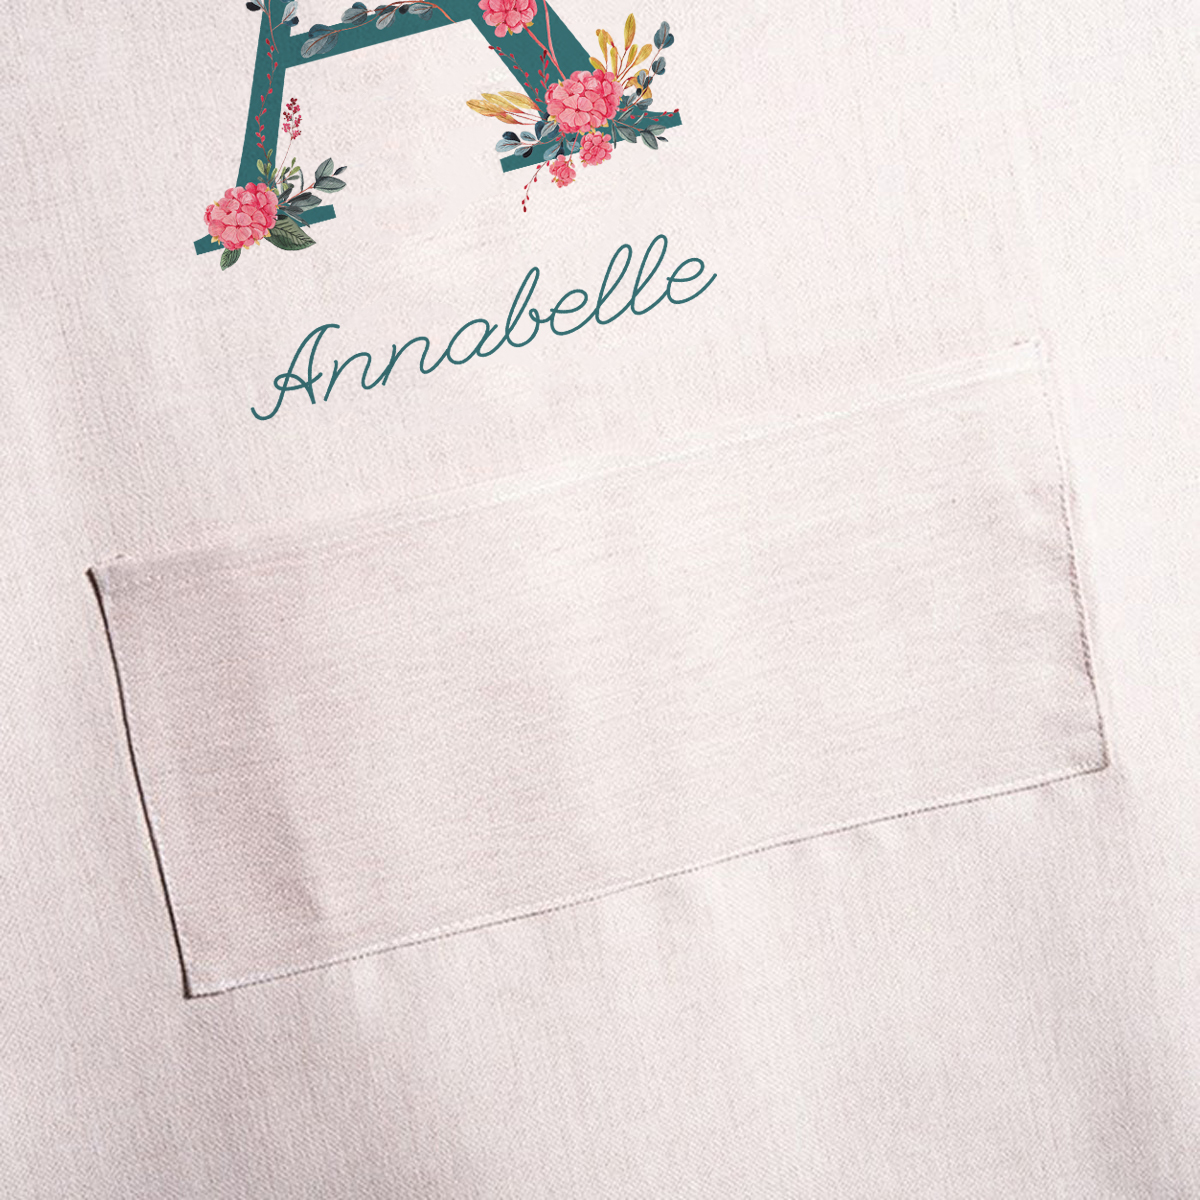 Personalised Apron - Floral Name & Initial